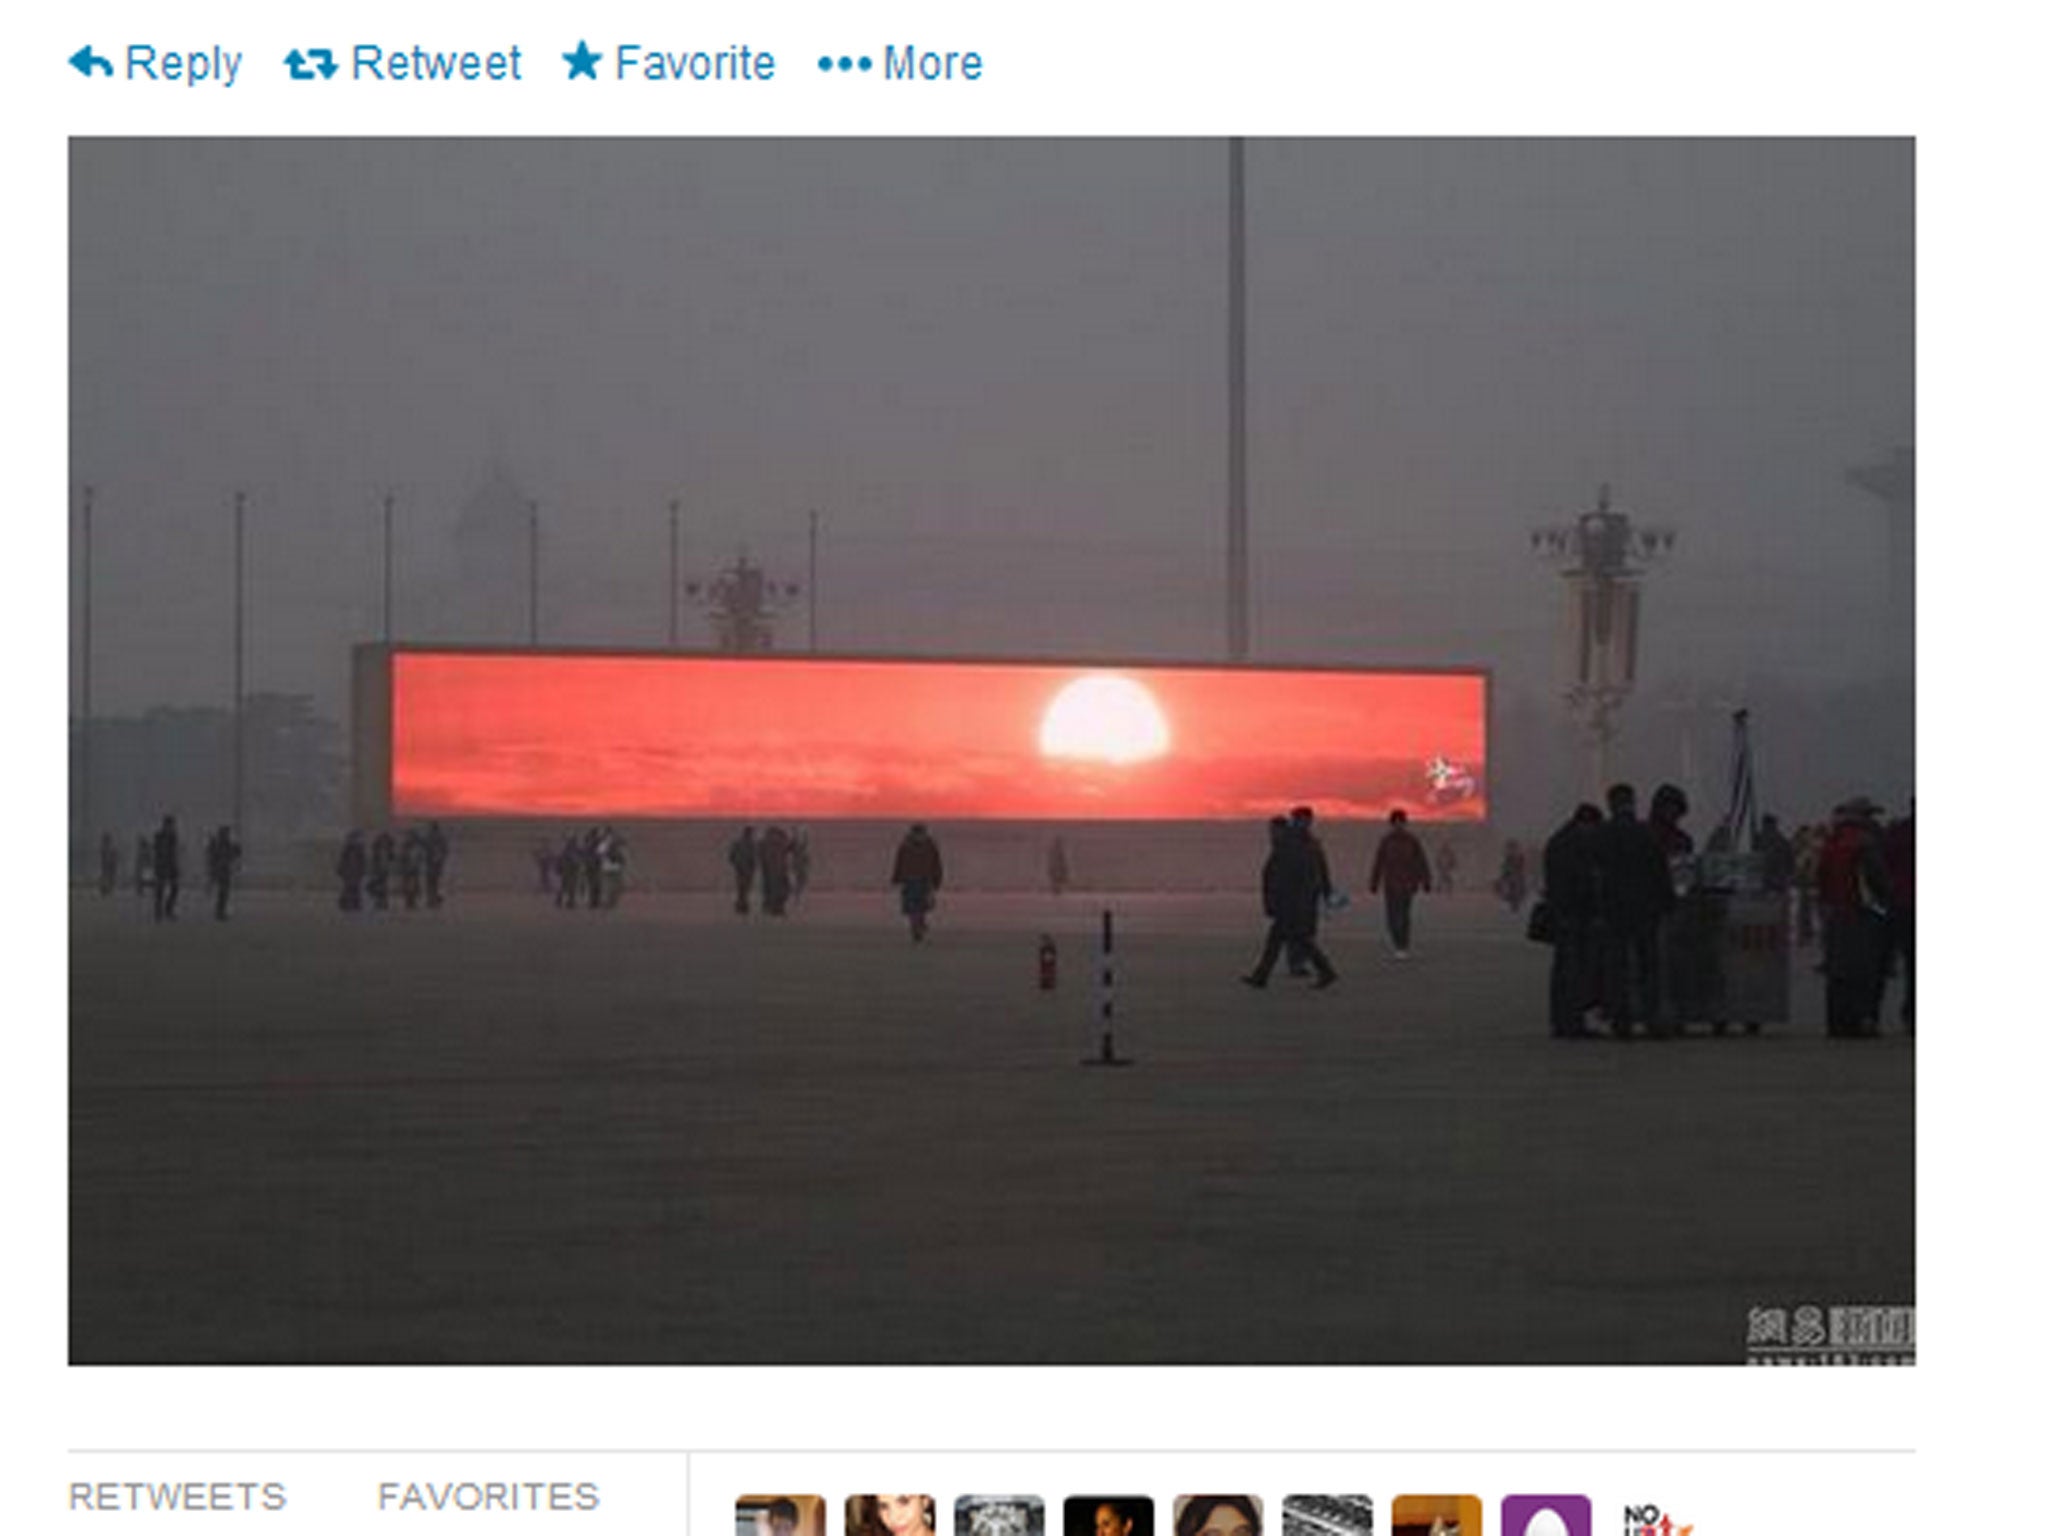 Twitter users started sharing this image, appearing to show people watching a sunrise televised in Tiananmen Square, Beijing